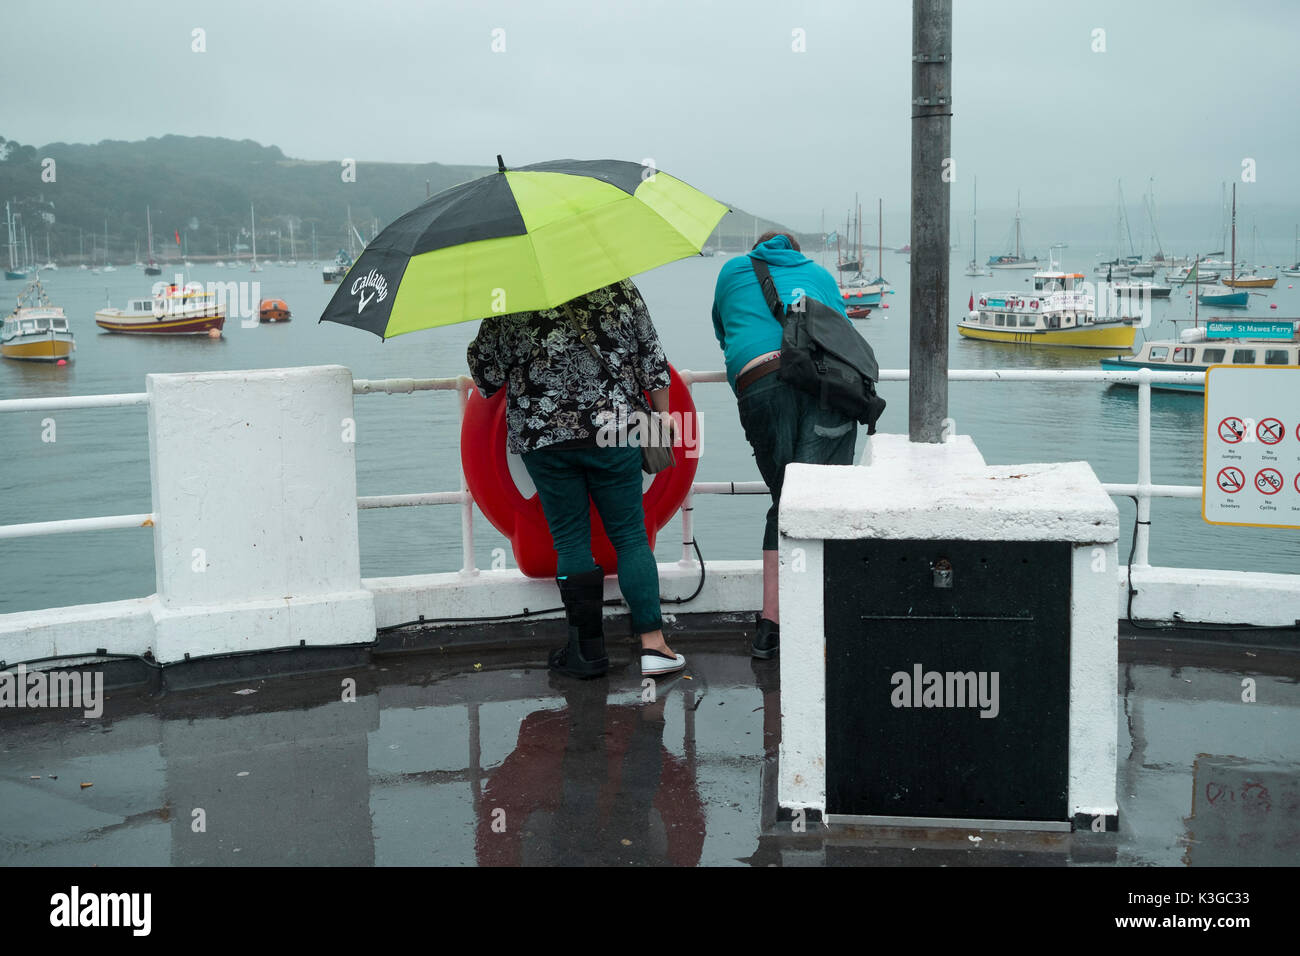 Falmouth, UK. 03rd Sep, 2017. A couple enjoy a wet walk along the Prince of Wales Pier, Falmouth Cornwall under a nice big golf umbrella as rain sets in on last weekend of the traditional summer holidays. Credit: Mick Buston/Alamy Live News Stock Photo